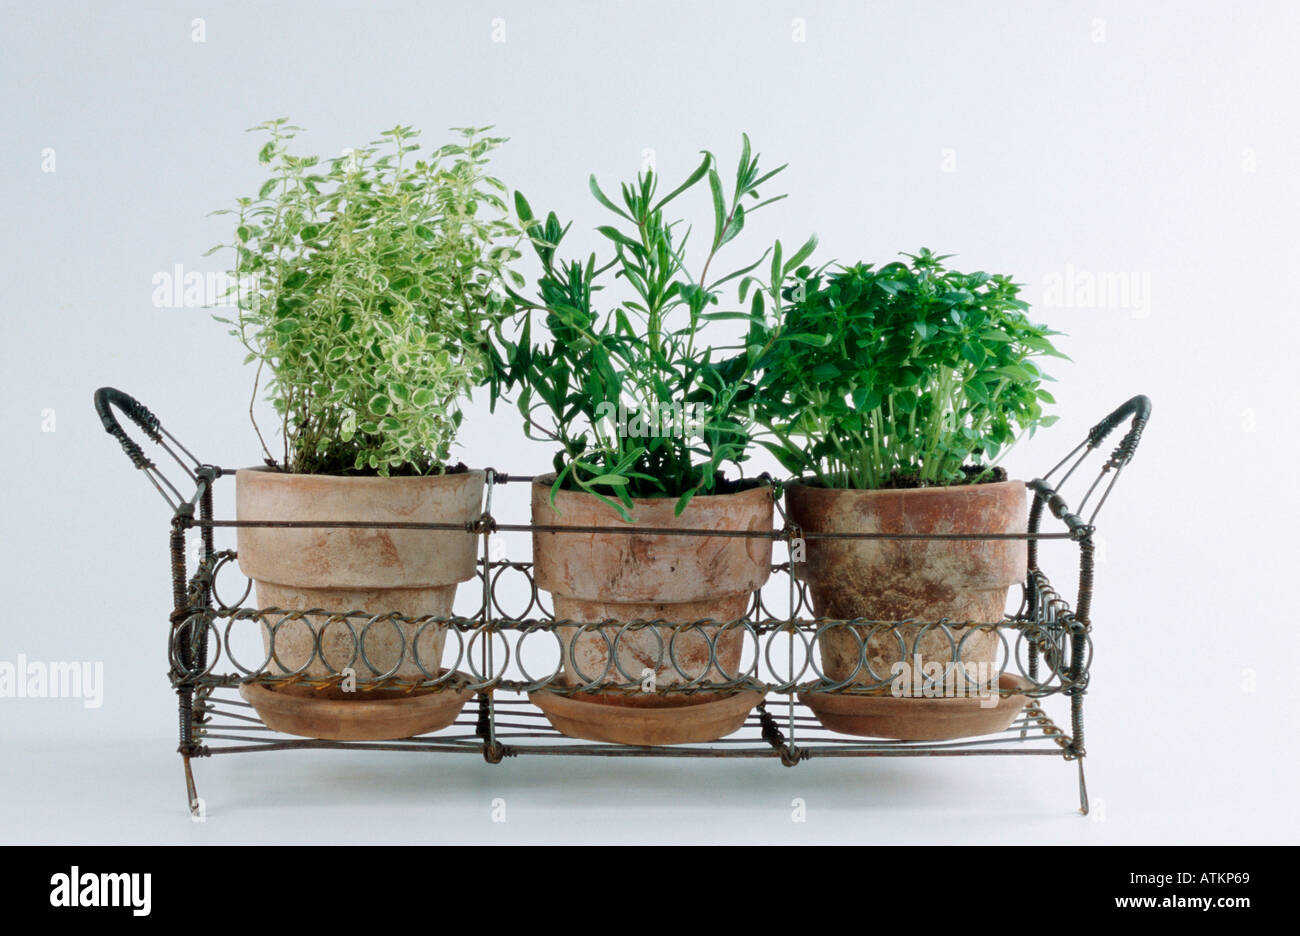 Pots with herbs Stock Photo